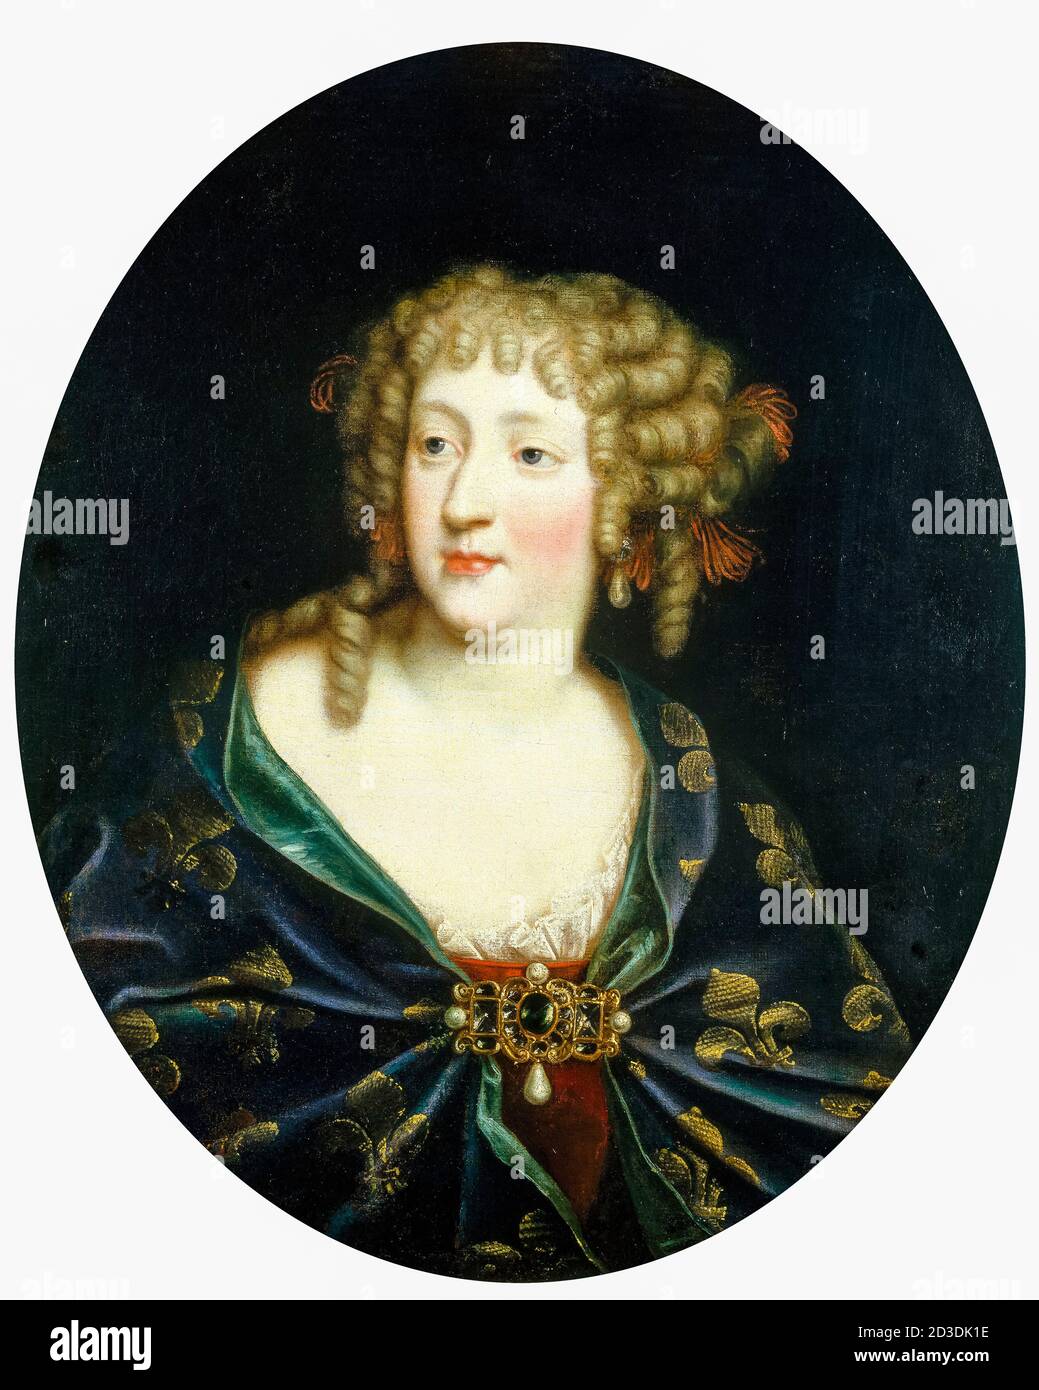 Marie Thérèse of Austria (1638-1683), Queen Consort of France, portrait painting by unknown artist, 1660-1683 Stock Photo